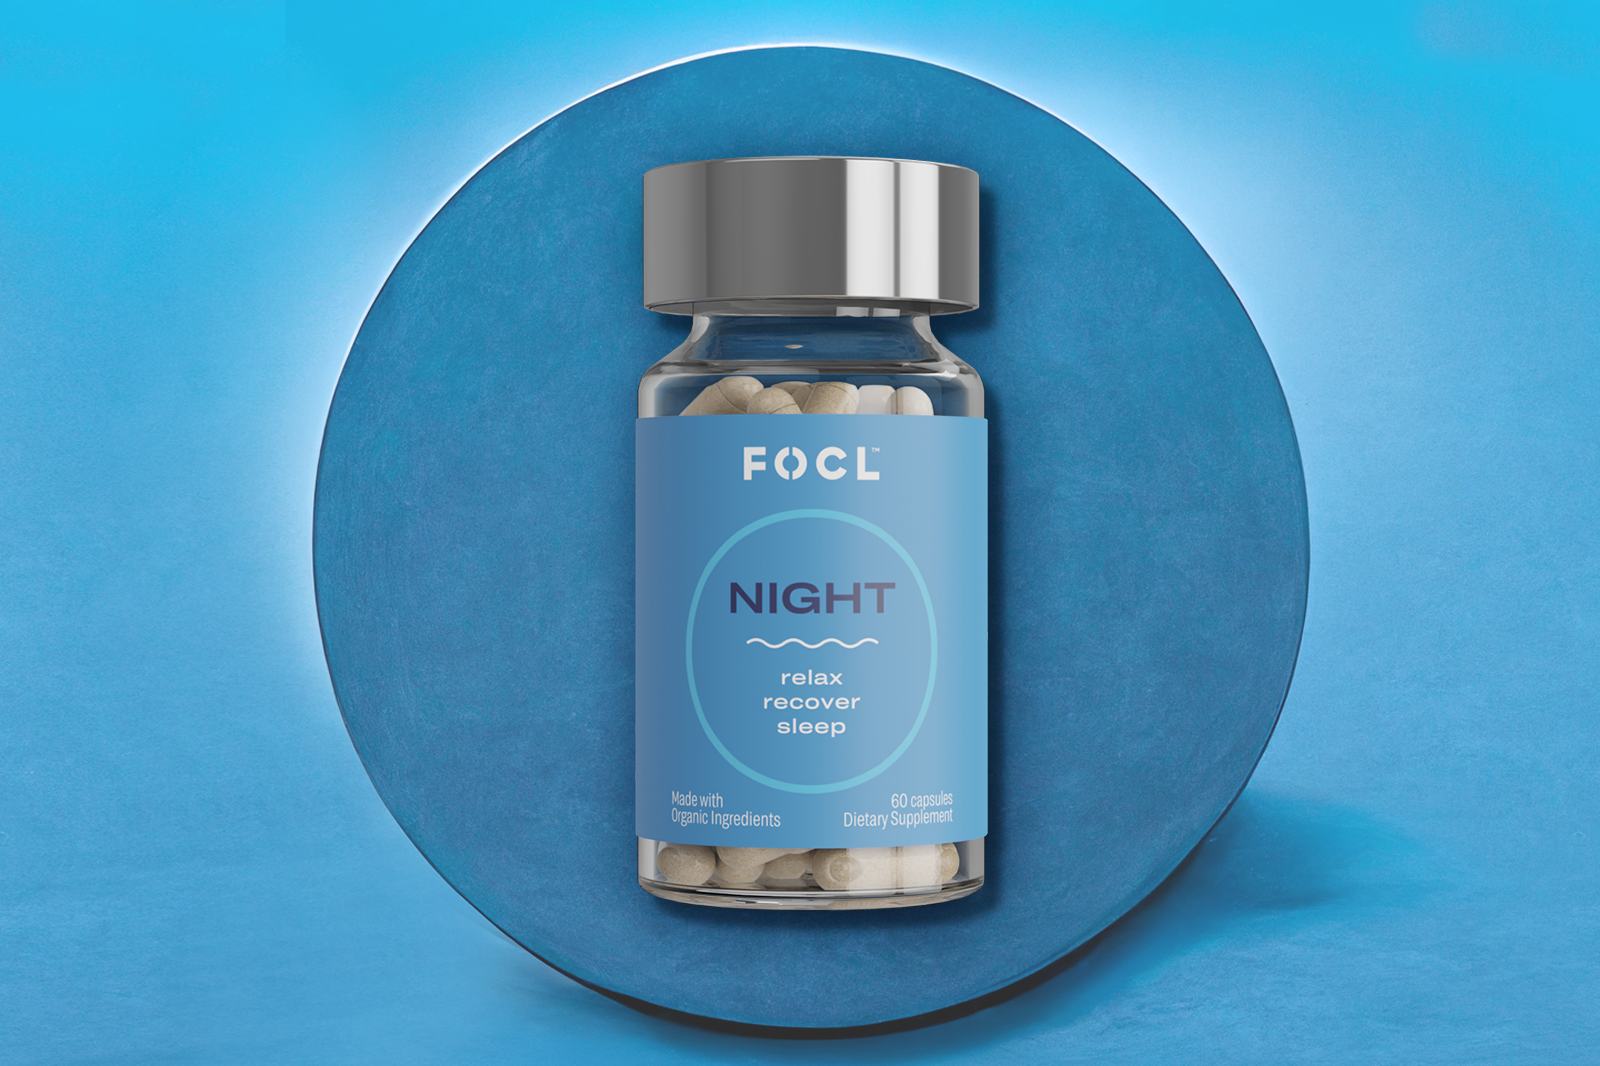 Jar of FOCL Night capsules on a blue background.